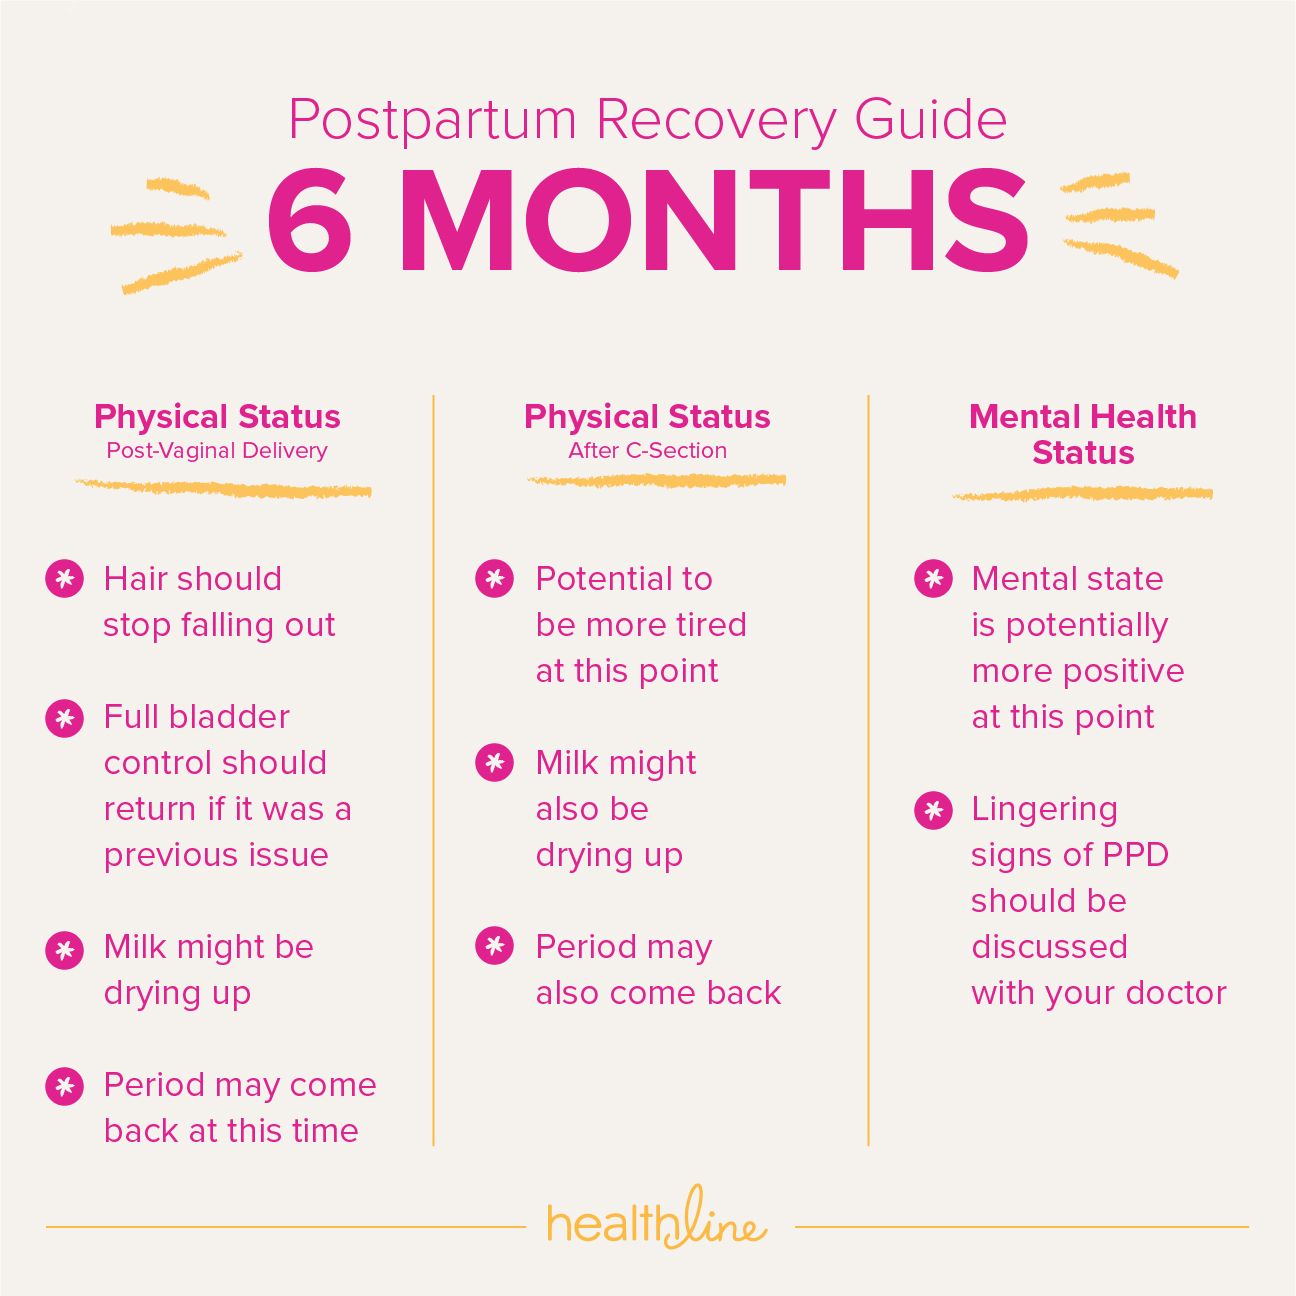 Life After Childbirth: Postpartum Care and Recovery